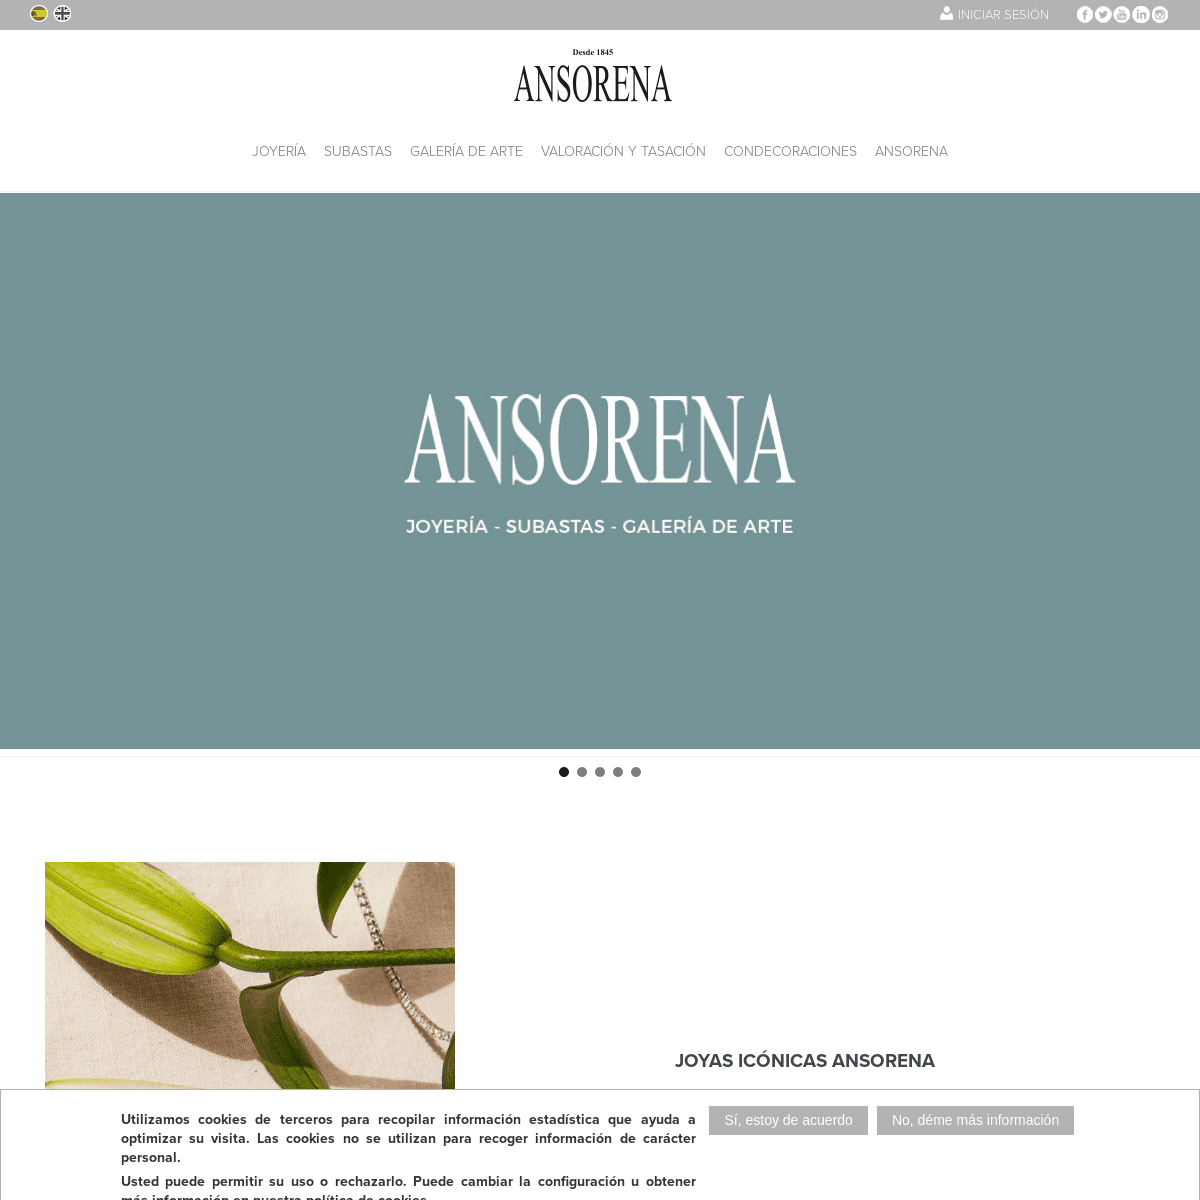 A complete backup of https://ansorena.com